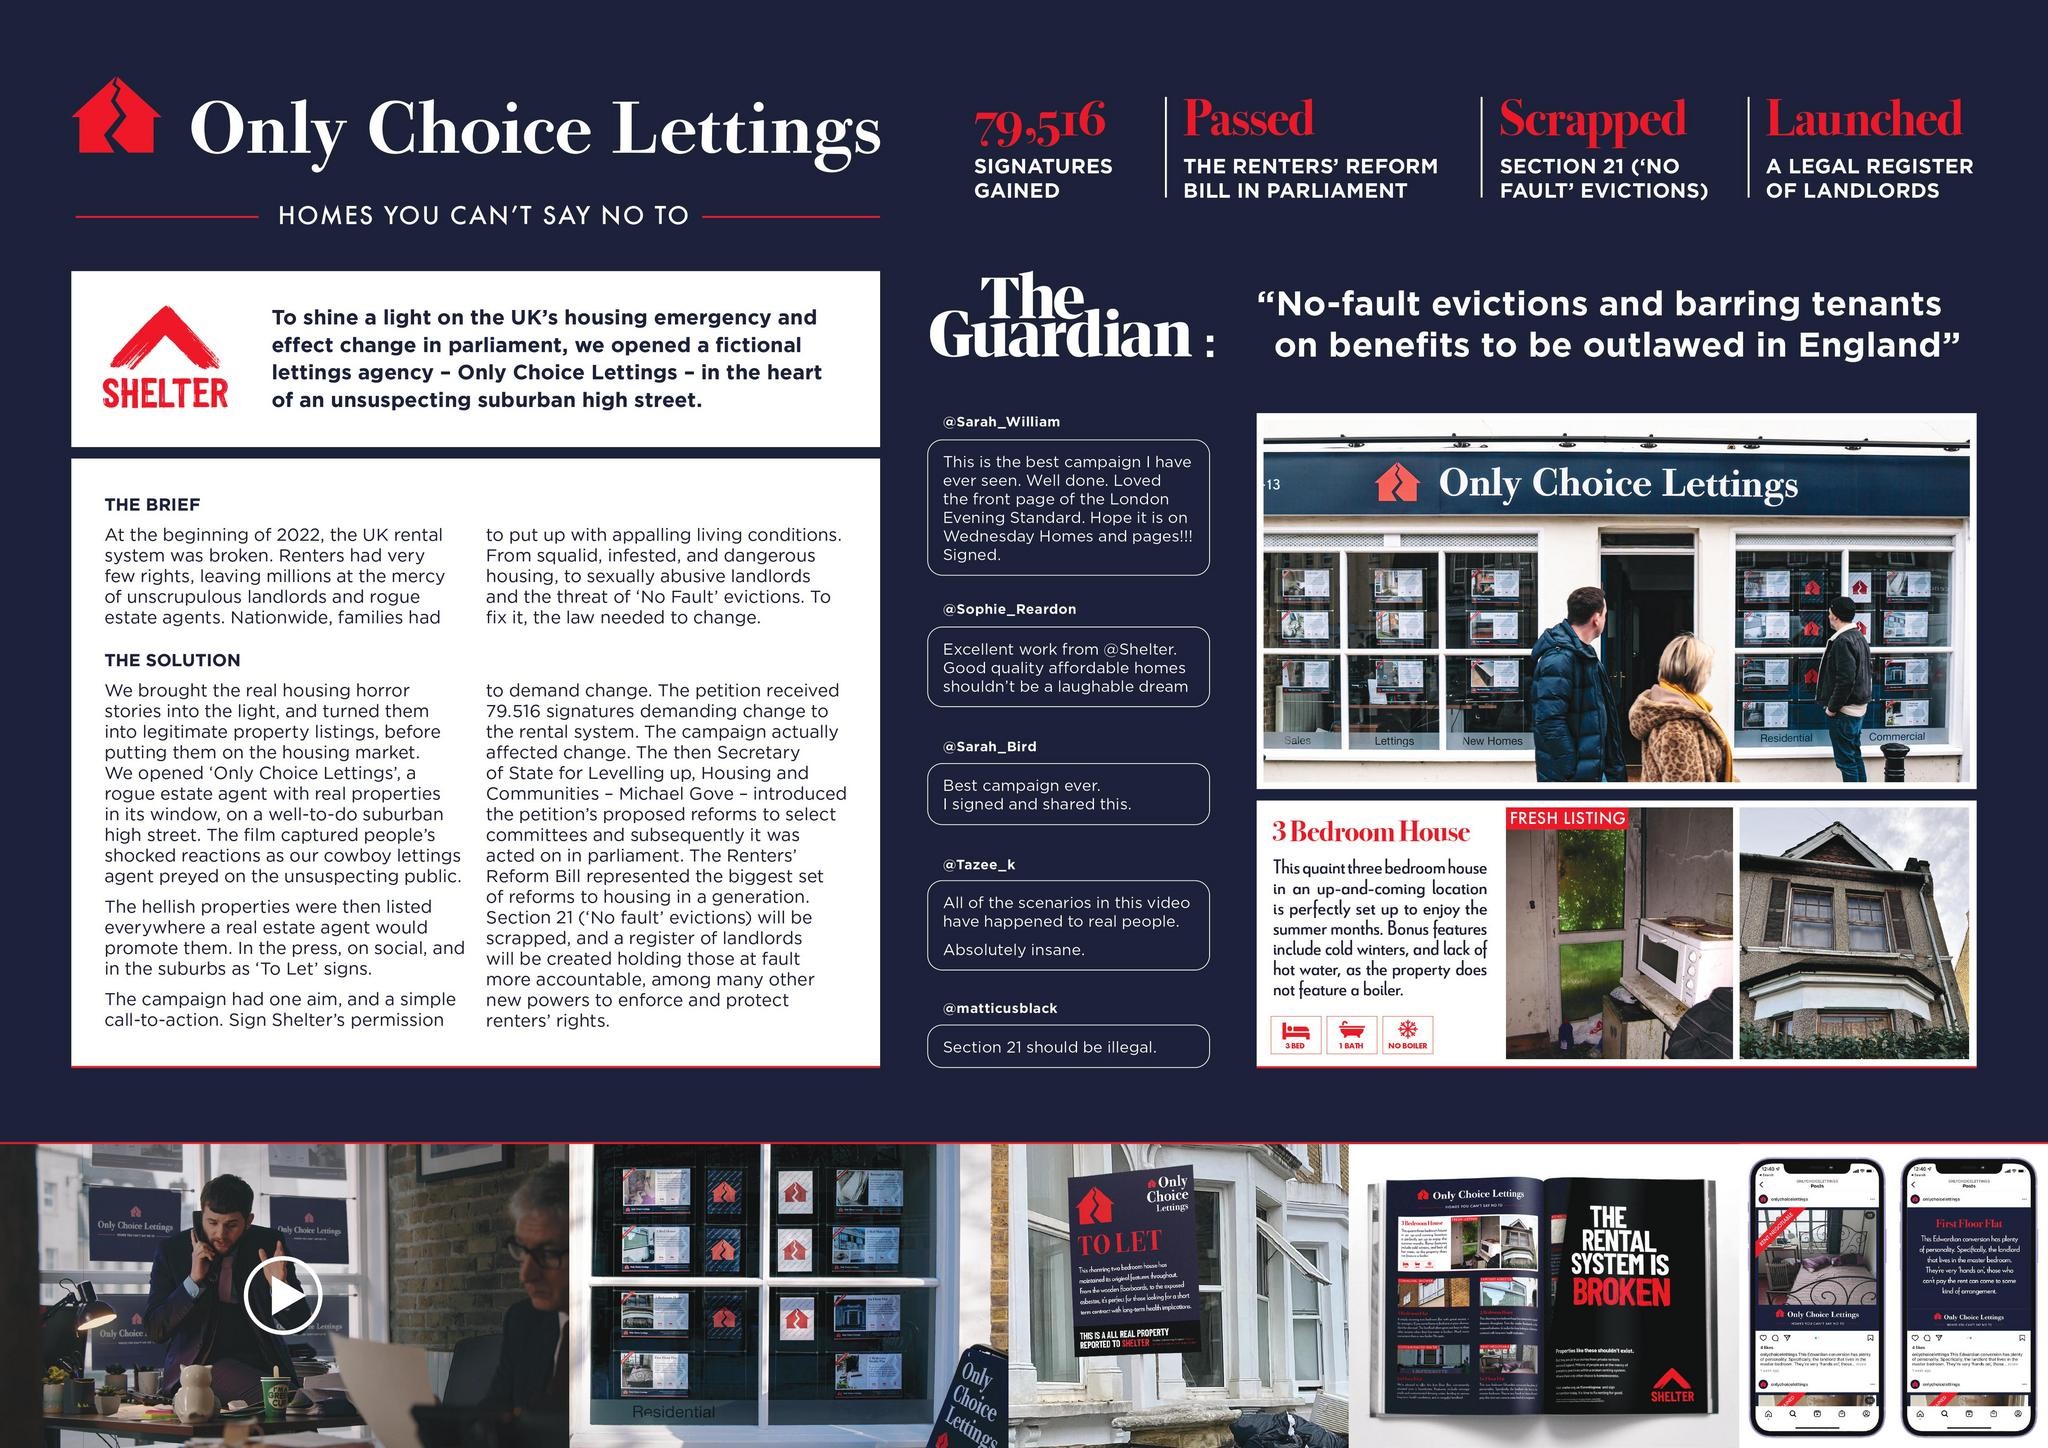 Shelter - Only Choice Lettings 